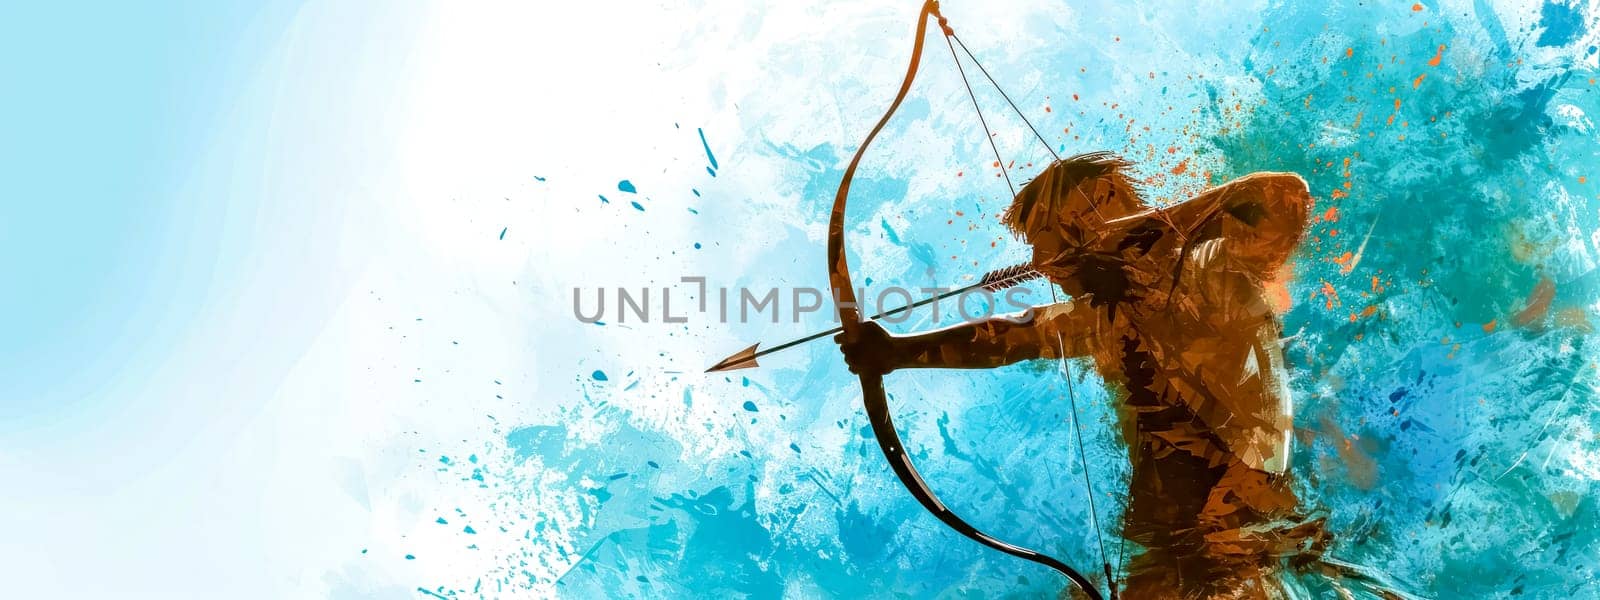 dynamic and abstract representation of an archer in the act of shooting an arrow, set against a backdrop of explosive blue and orange colors, evoking a sense of motion and energy. by Edophoto